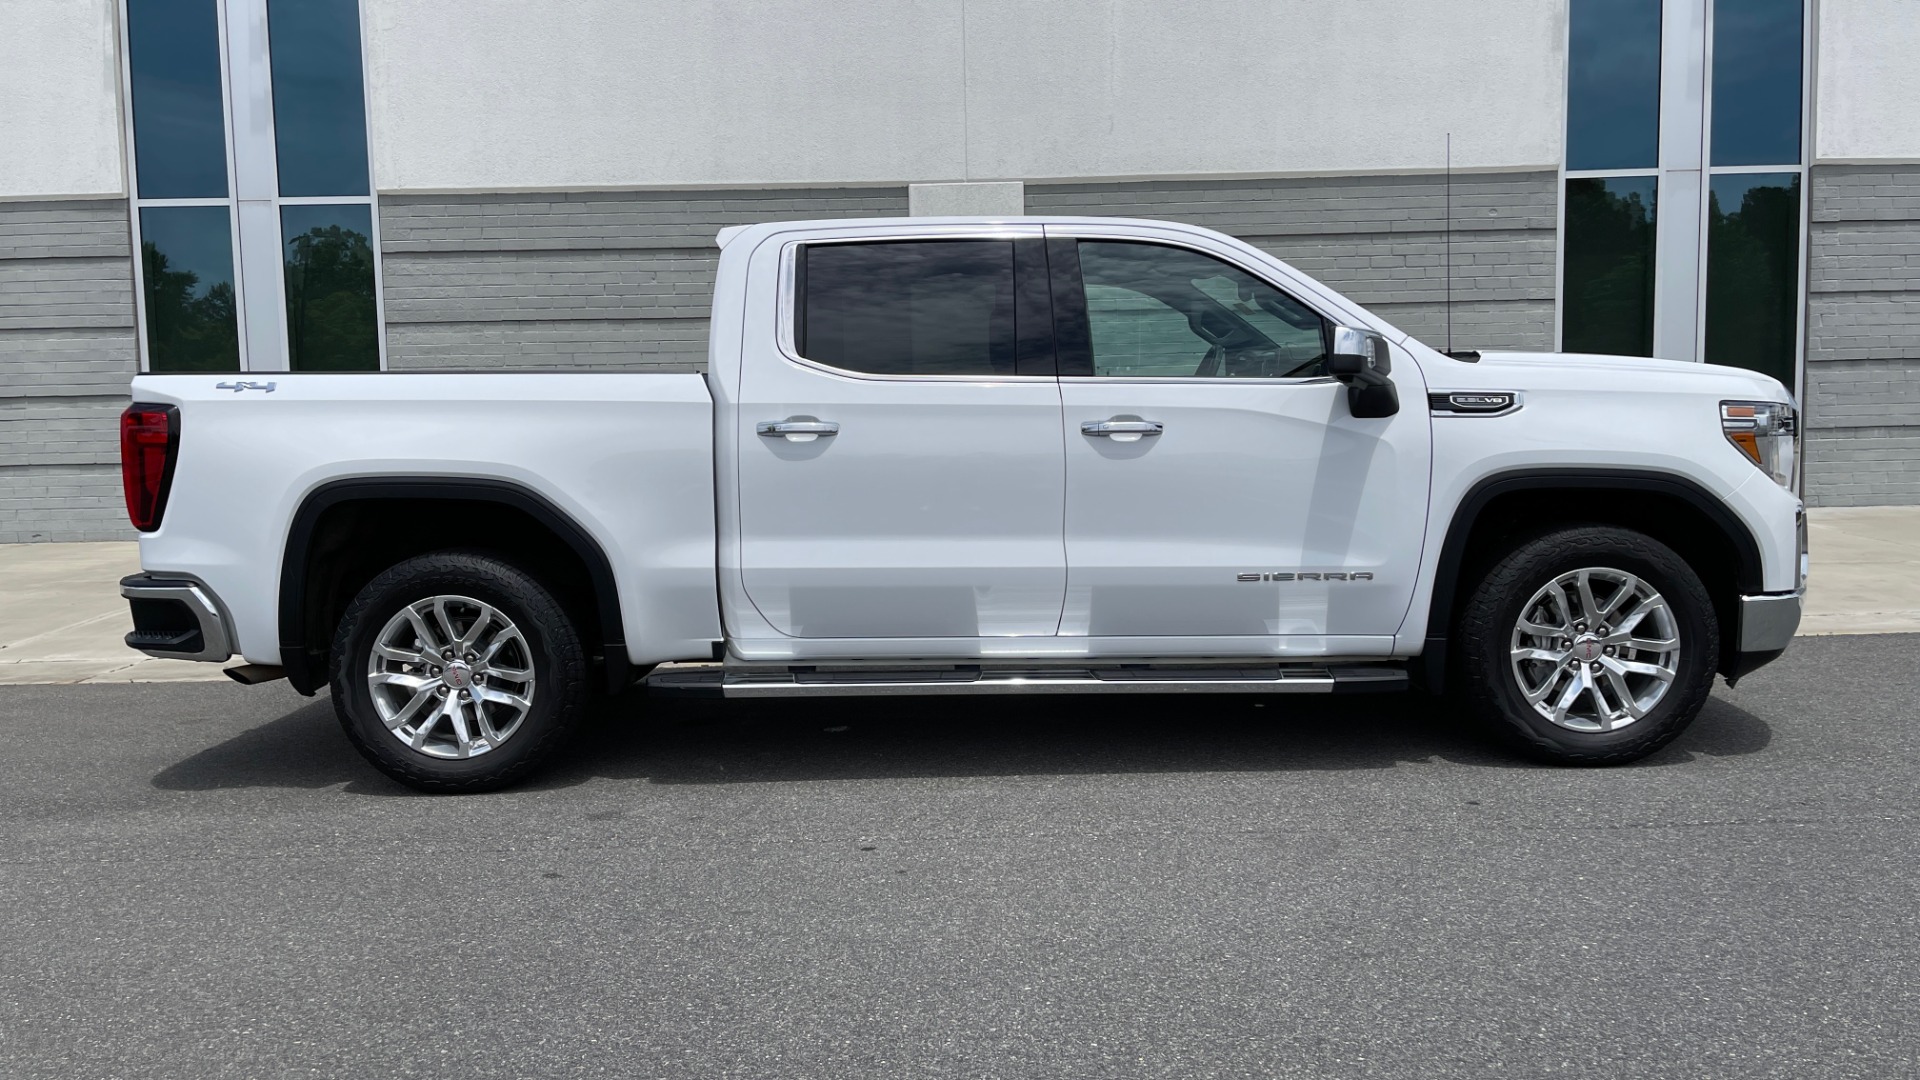 Used 2019 GMC SIERRA 1500 SLT 4X4 CREWCAB / 5.3L V8 / 8-SPD AUTO / NAV / BOSE / REARVIEW for sale Sold at Formula Imports in Charlotte NC 28227 7